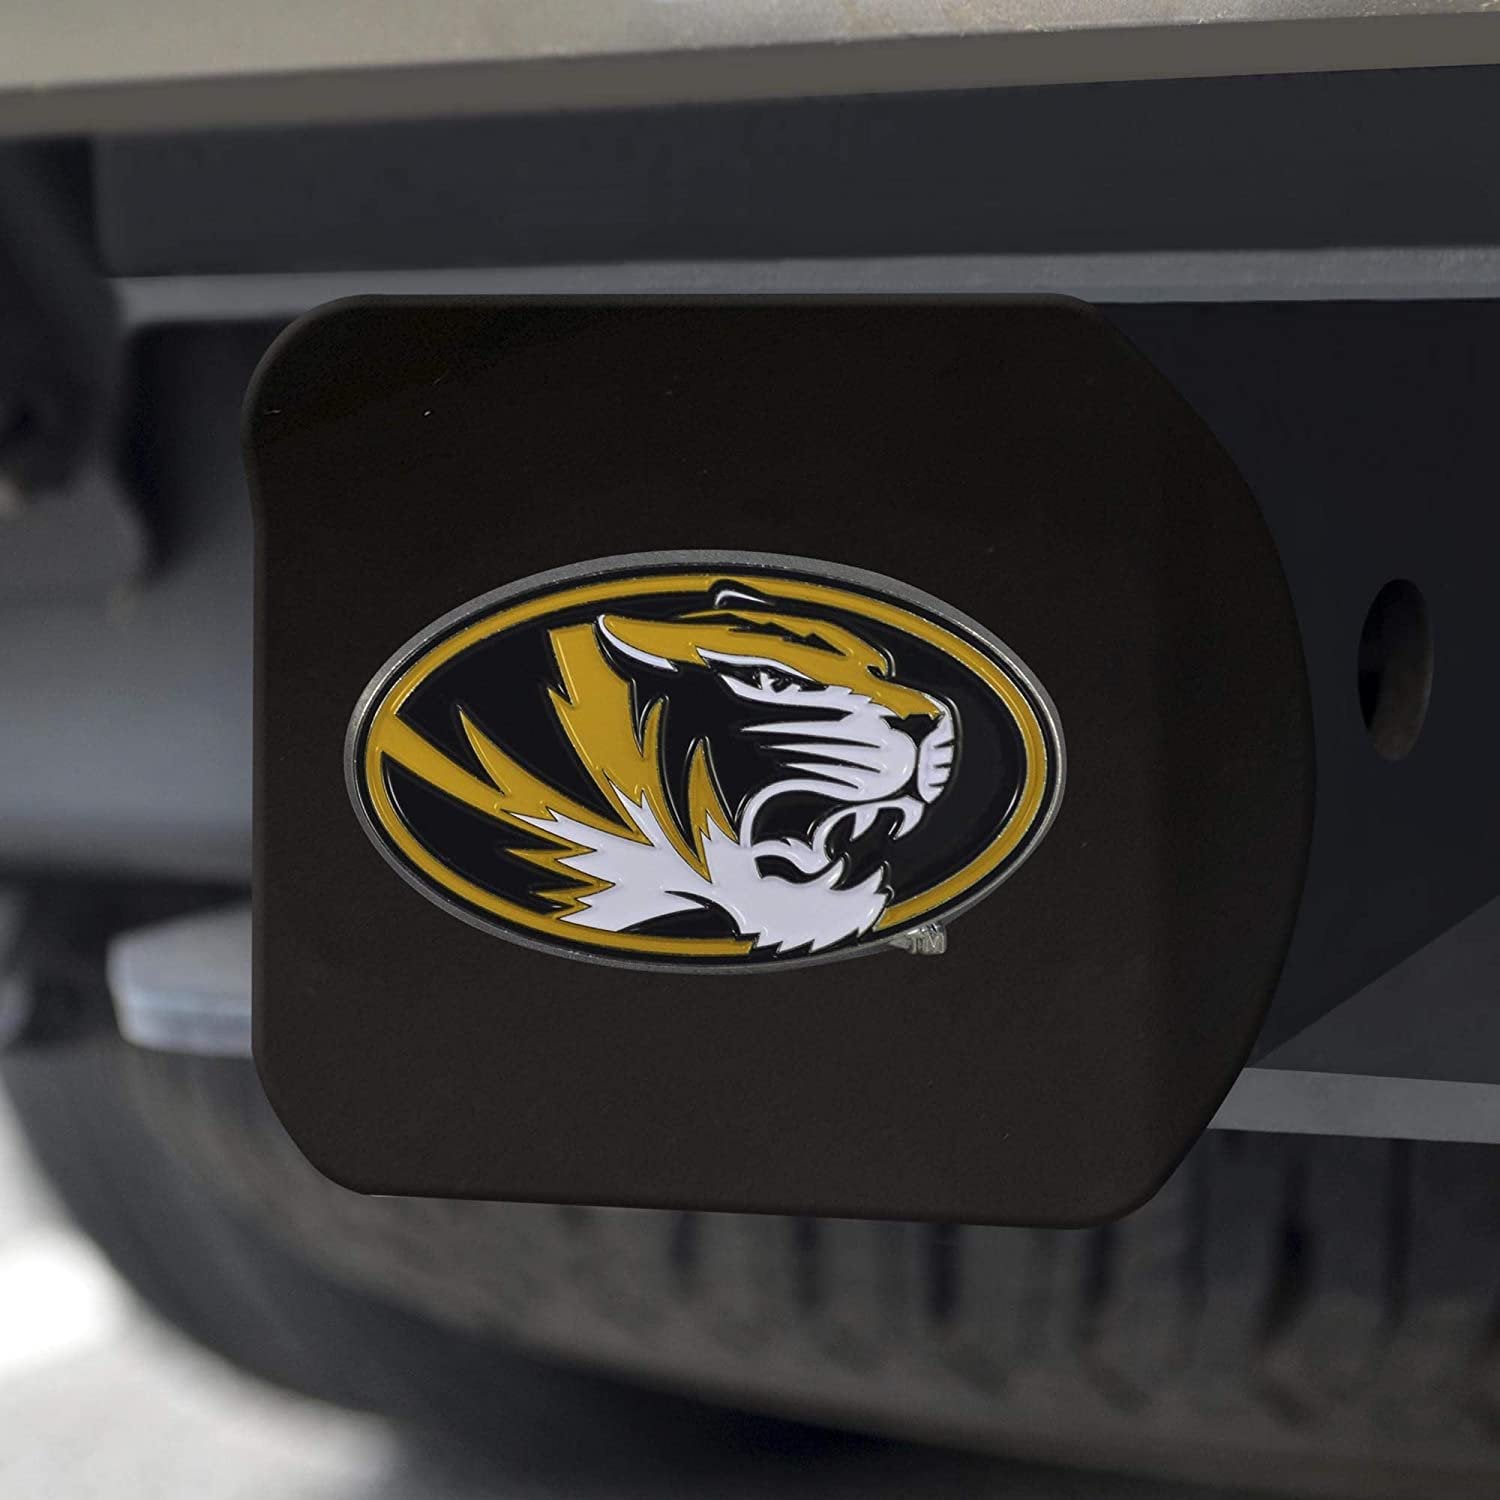 Missouri Tigers Solid Metal Black Hitch Cover with Color Metal Emblem 2 Inch Square Type III University of